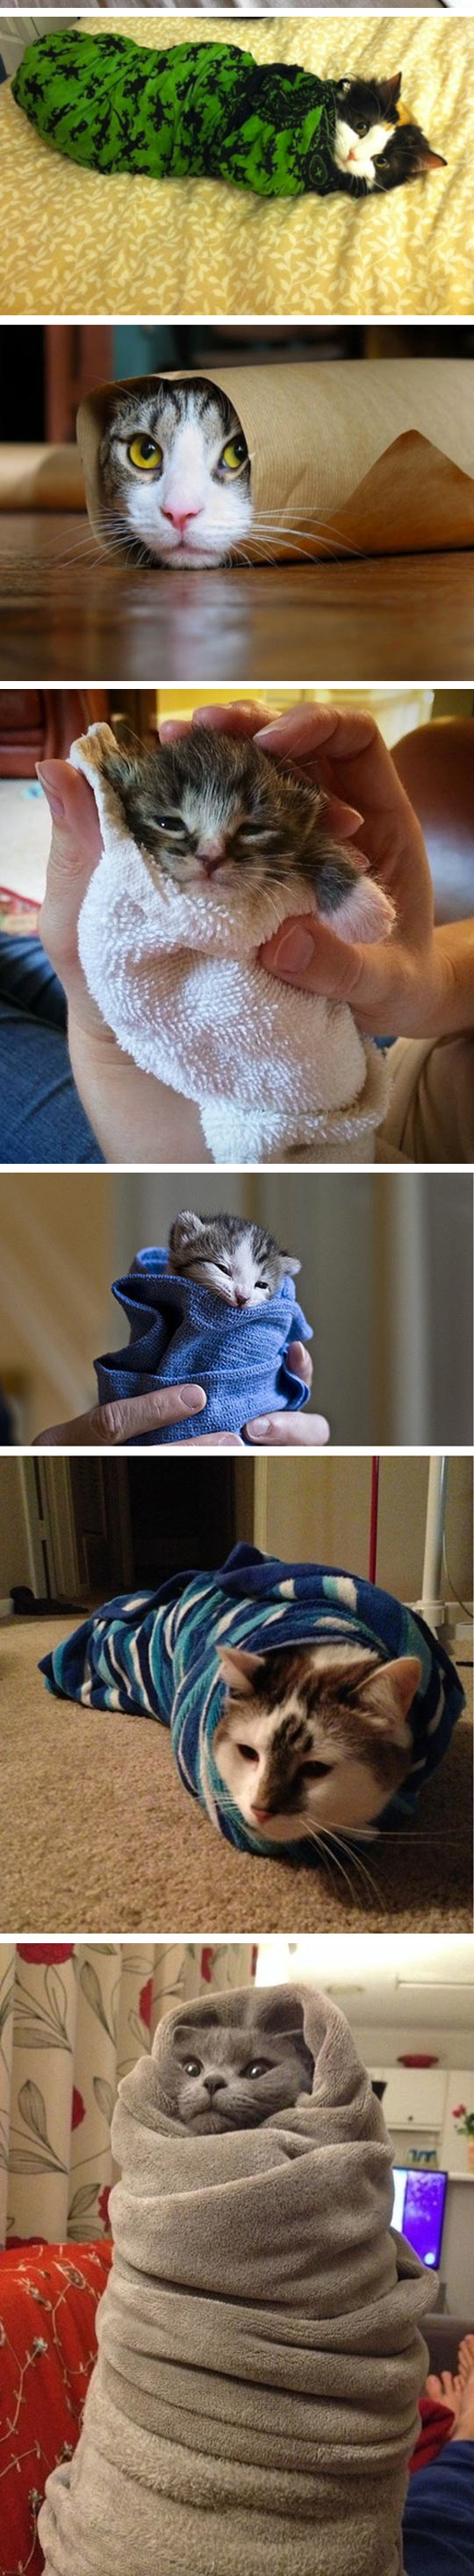 funny-cats-cover-towels-fabric-burrito-tiny-heads